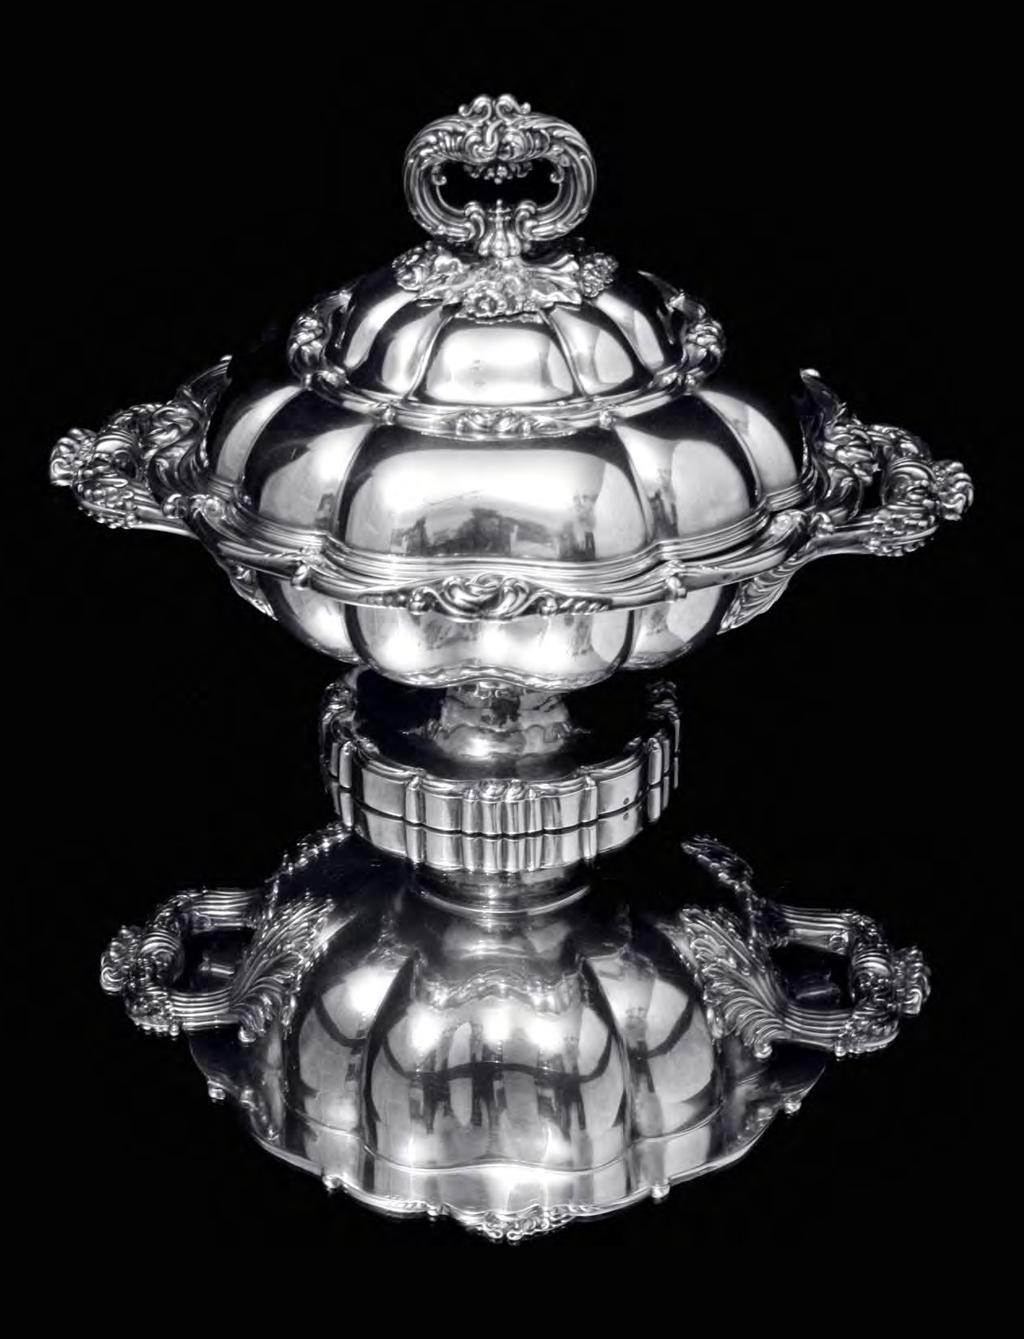 Another Magnificent Privately Commissioned Piece by France's Premier Silversmith "Jean- Baptiste Odiot", A Stunning Early 20th Century Covered Soup Tureen In Like